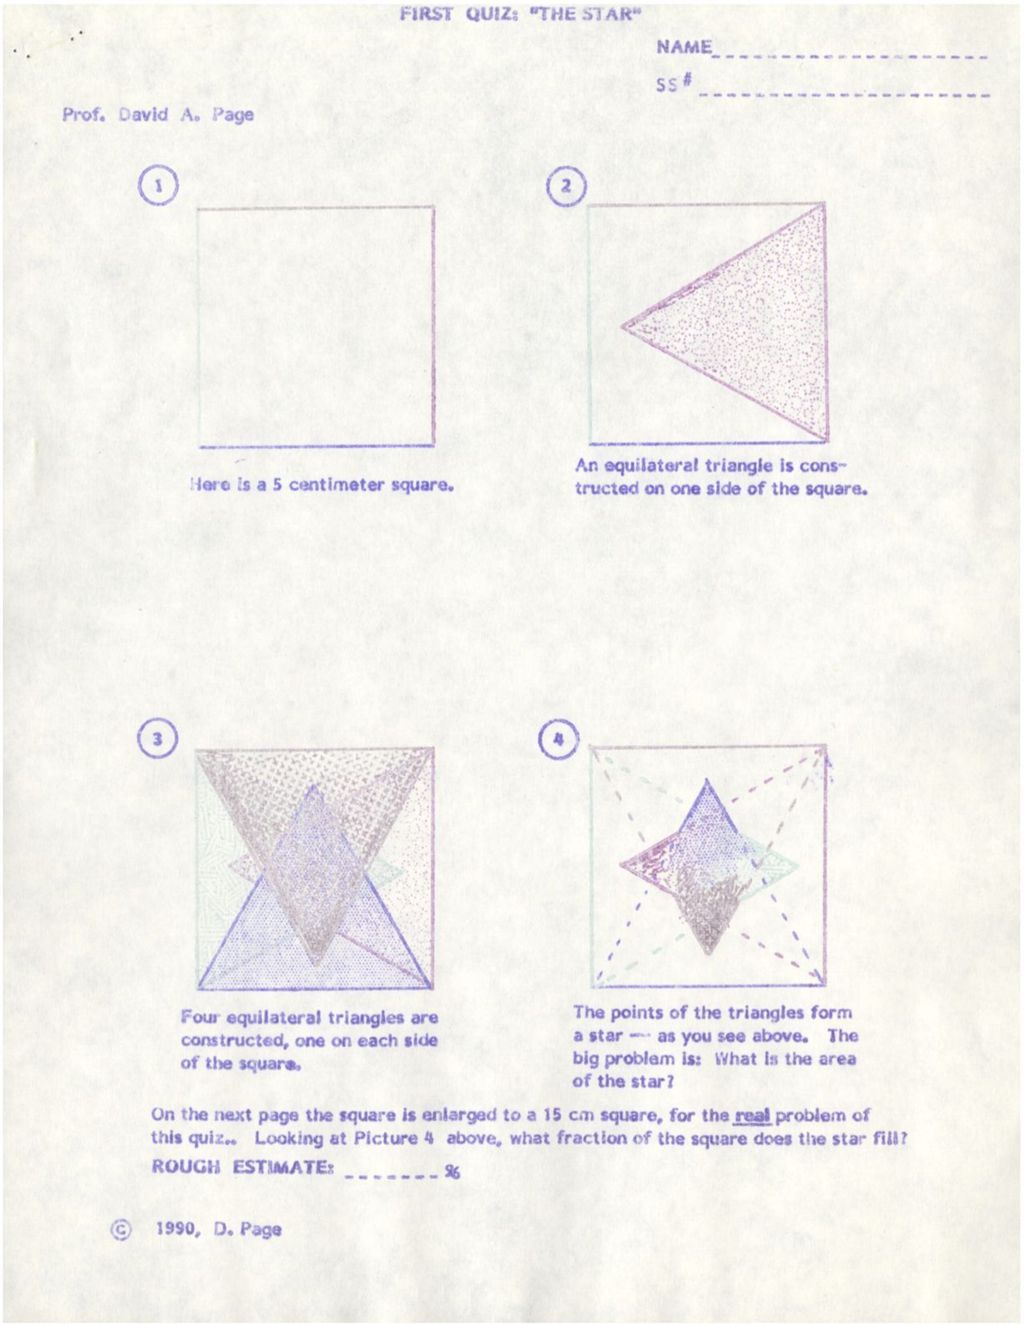 First Quiz: “The Star” (This quiz has 2 hint sheets) (1990)